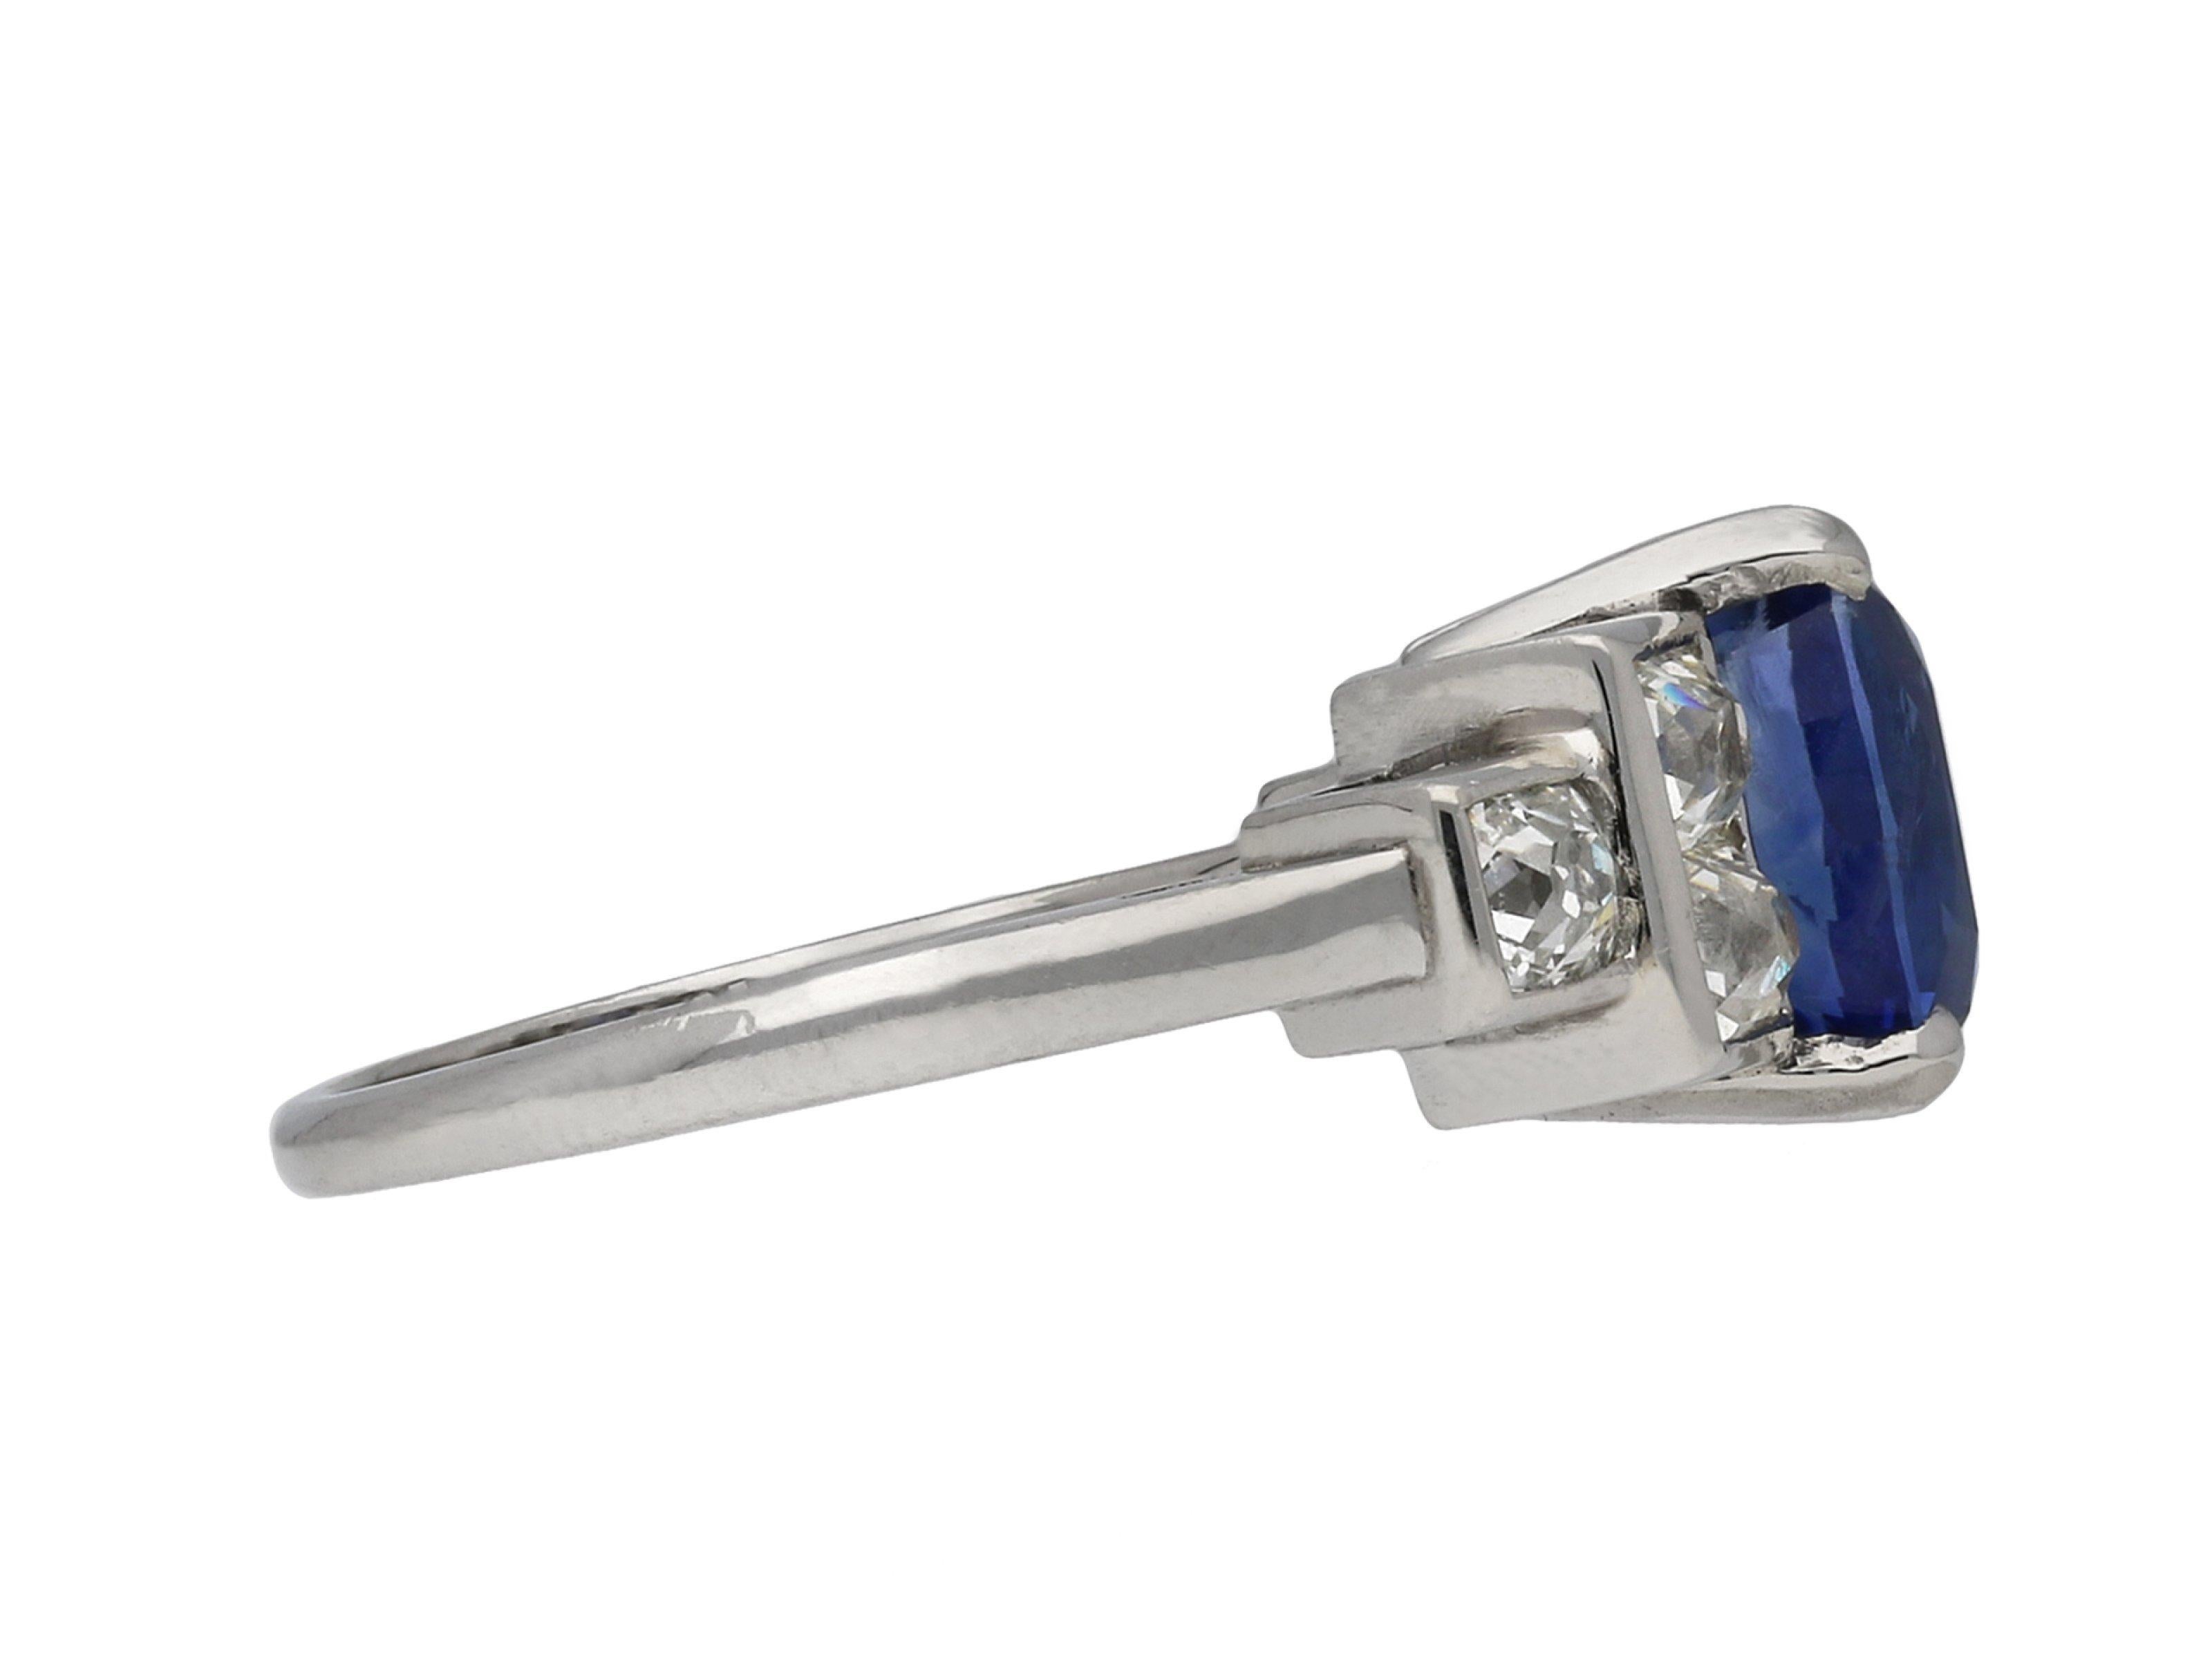 Vintage Burmese sapphire and diamond ring. Set to centre with an oval old cut Burmese sapphire in an open back claw setting with an approximate weight of 4.45 carats, flanked by six cushion shape old mine cut diamonds in open back rubover settings